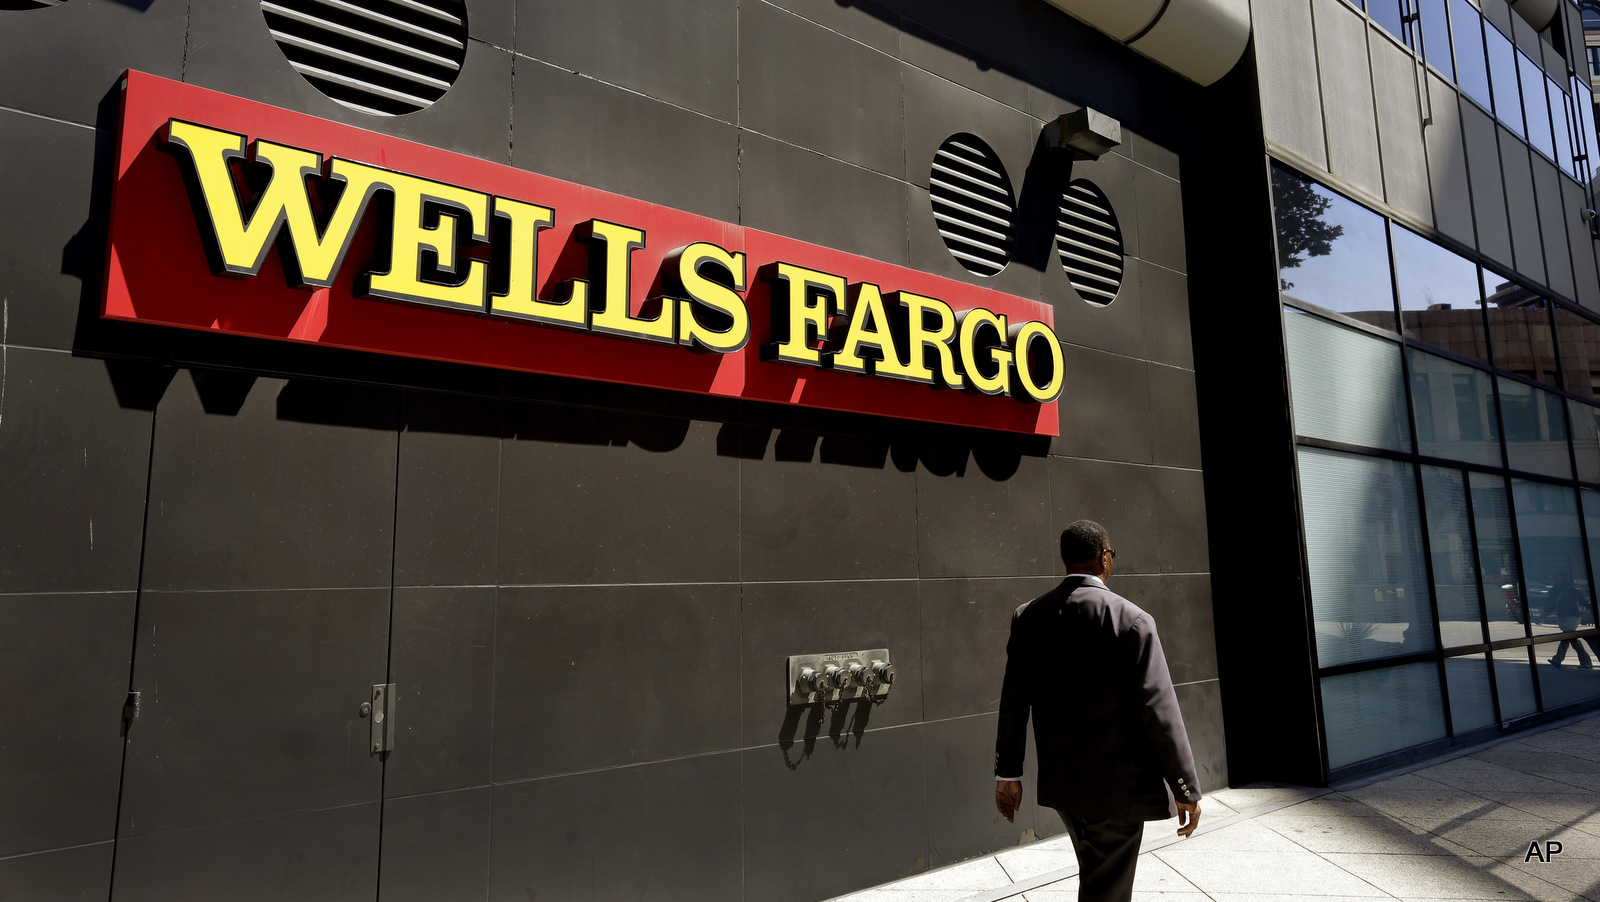 wells-fargo-ceo-called-to-testify-in-front-of-congress-as-massive-fraud-fallout-grows